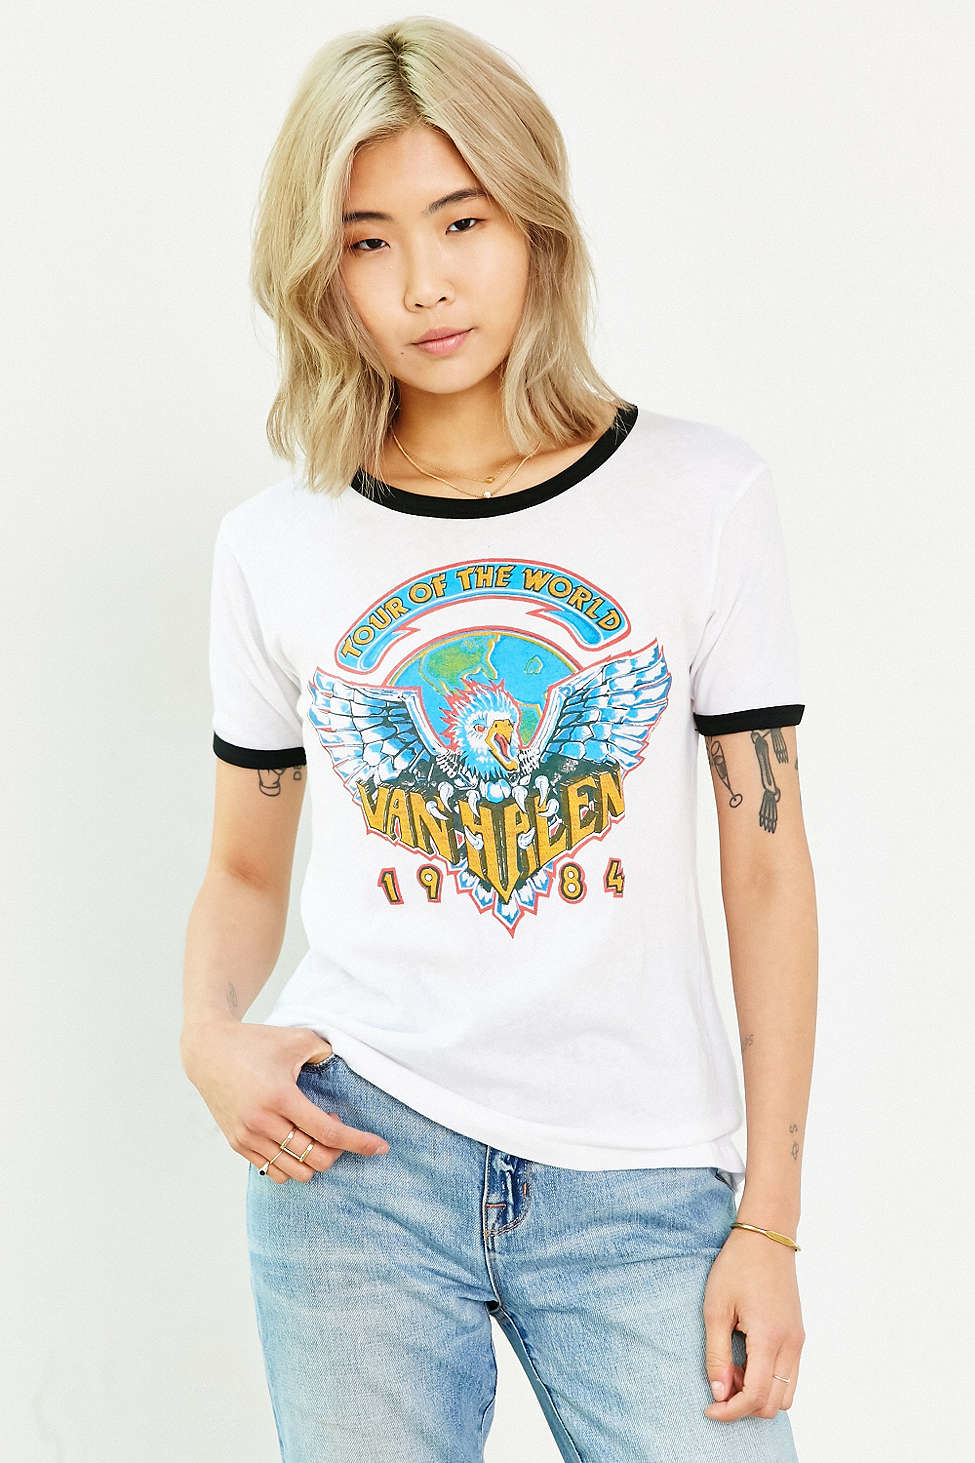 Rock band tees urban outfitters clothing line debenhams teen rochester